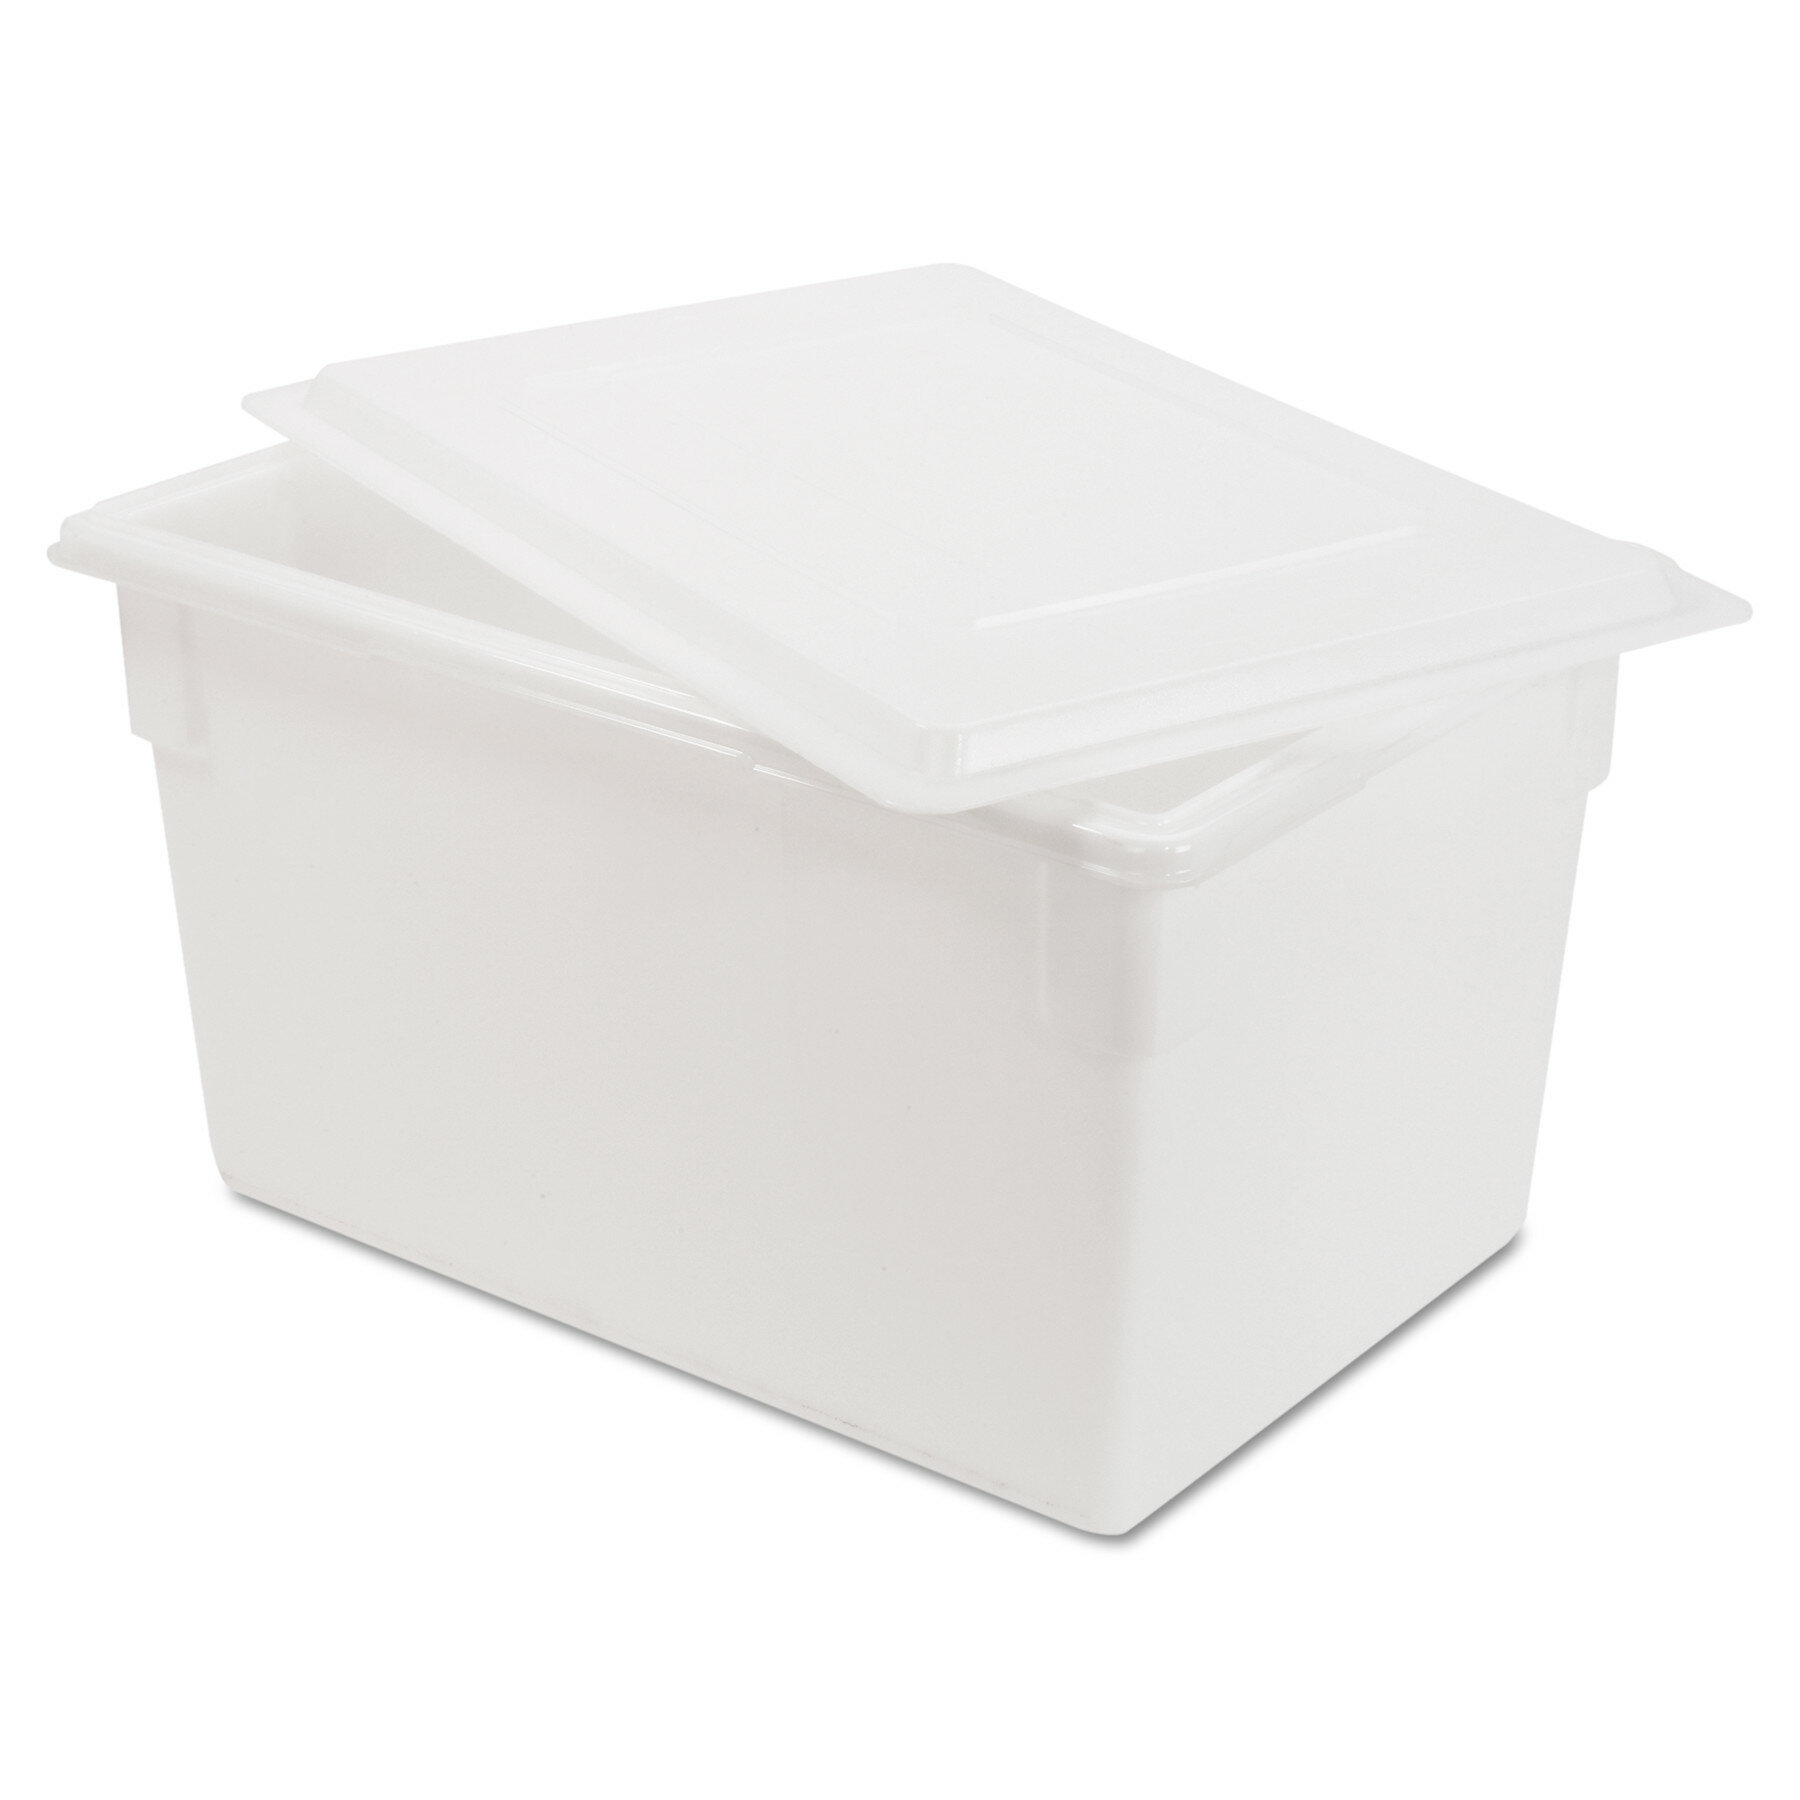 Rubbermaid Commercial Products Rectangle Plastic Food Storage Container